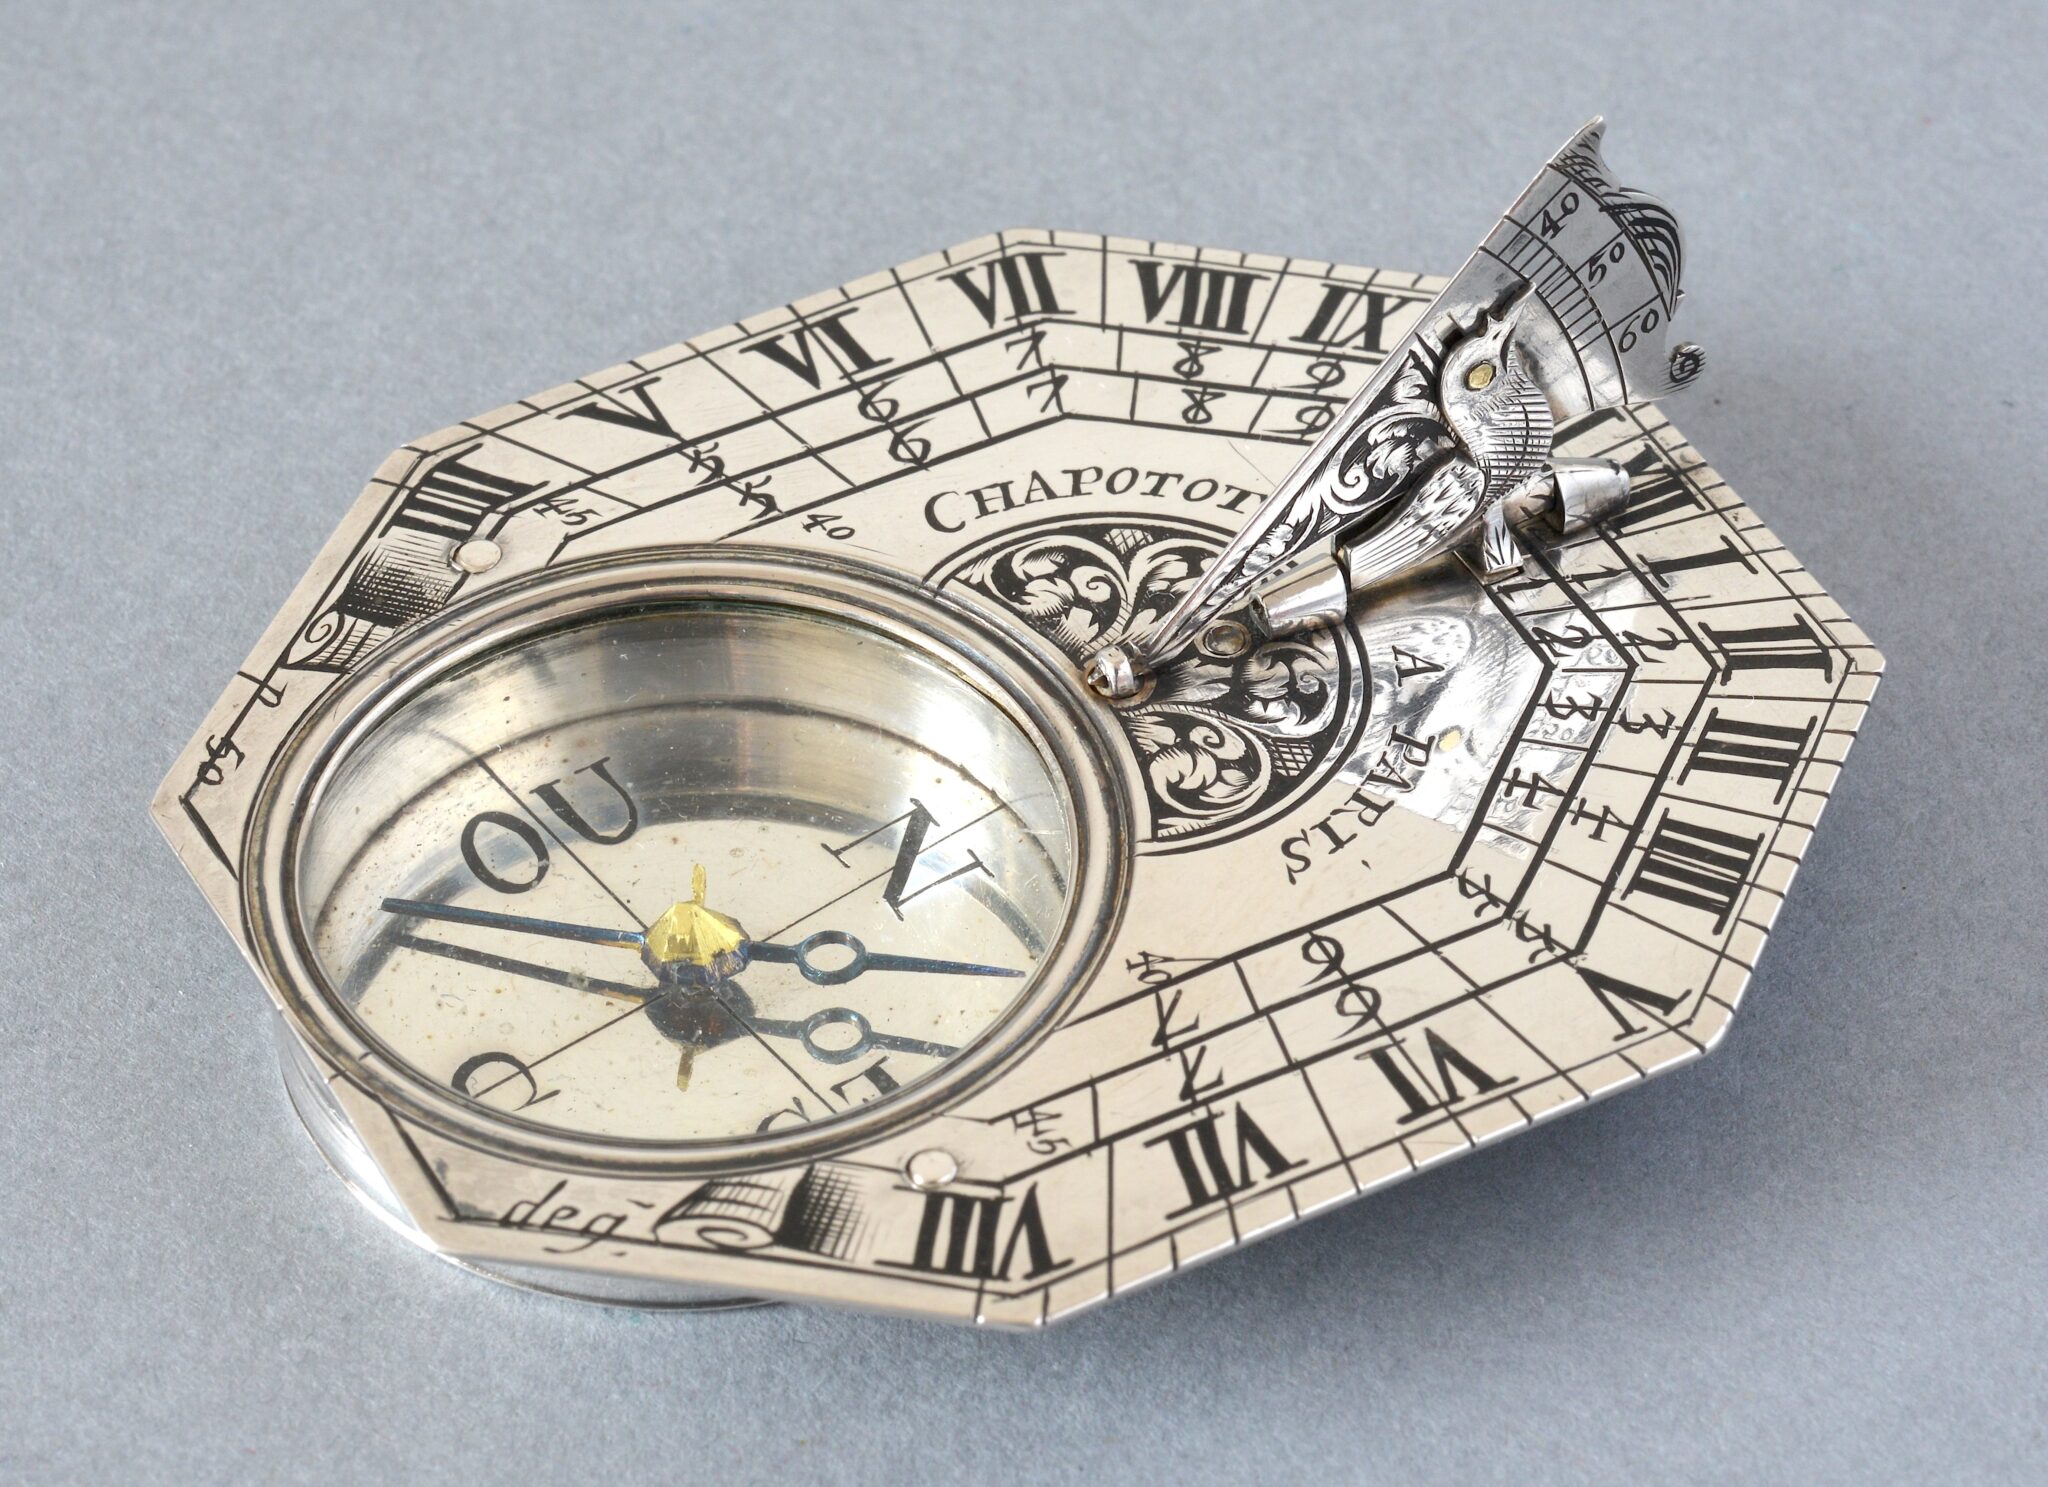 Silver horizontal sundial signed Chapotot à Paris made between 1681 and 1684